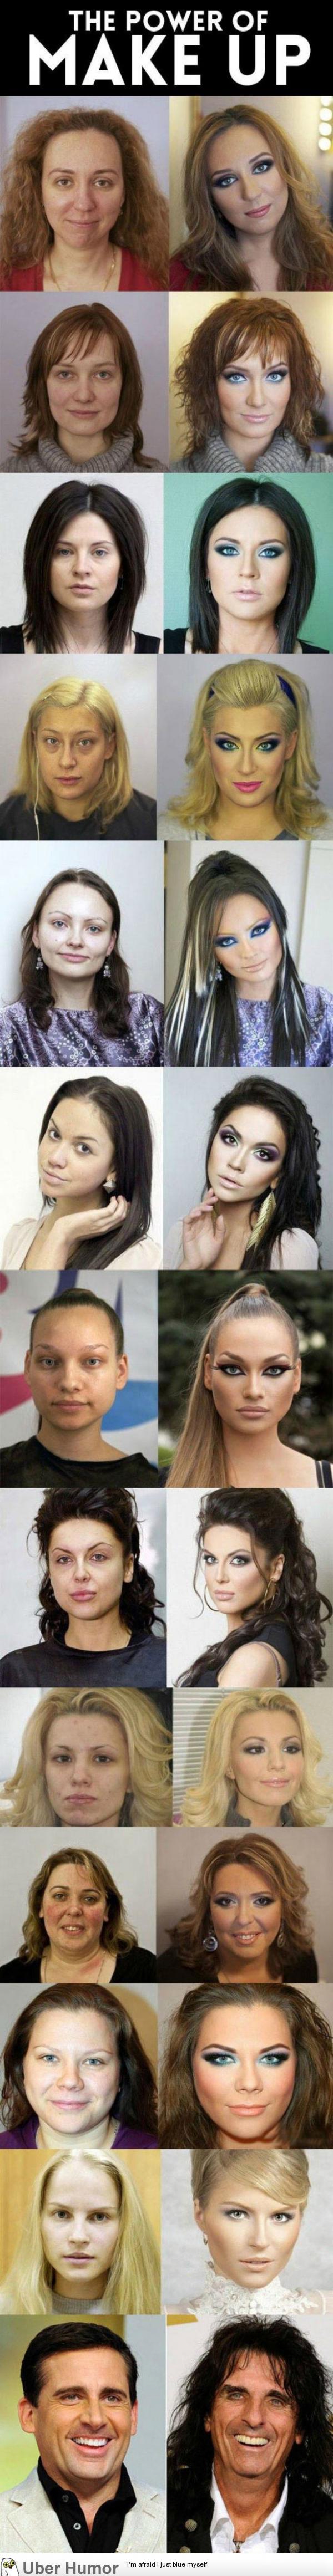 The power of makeup | Funny Pictures, Quotes, Pics, Photos, Images. Videos  of Really Very Cute animals.